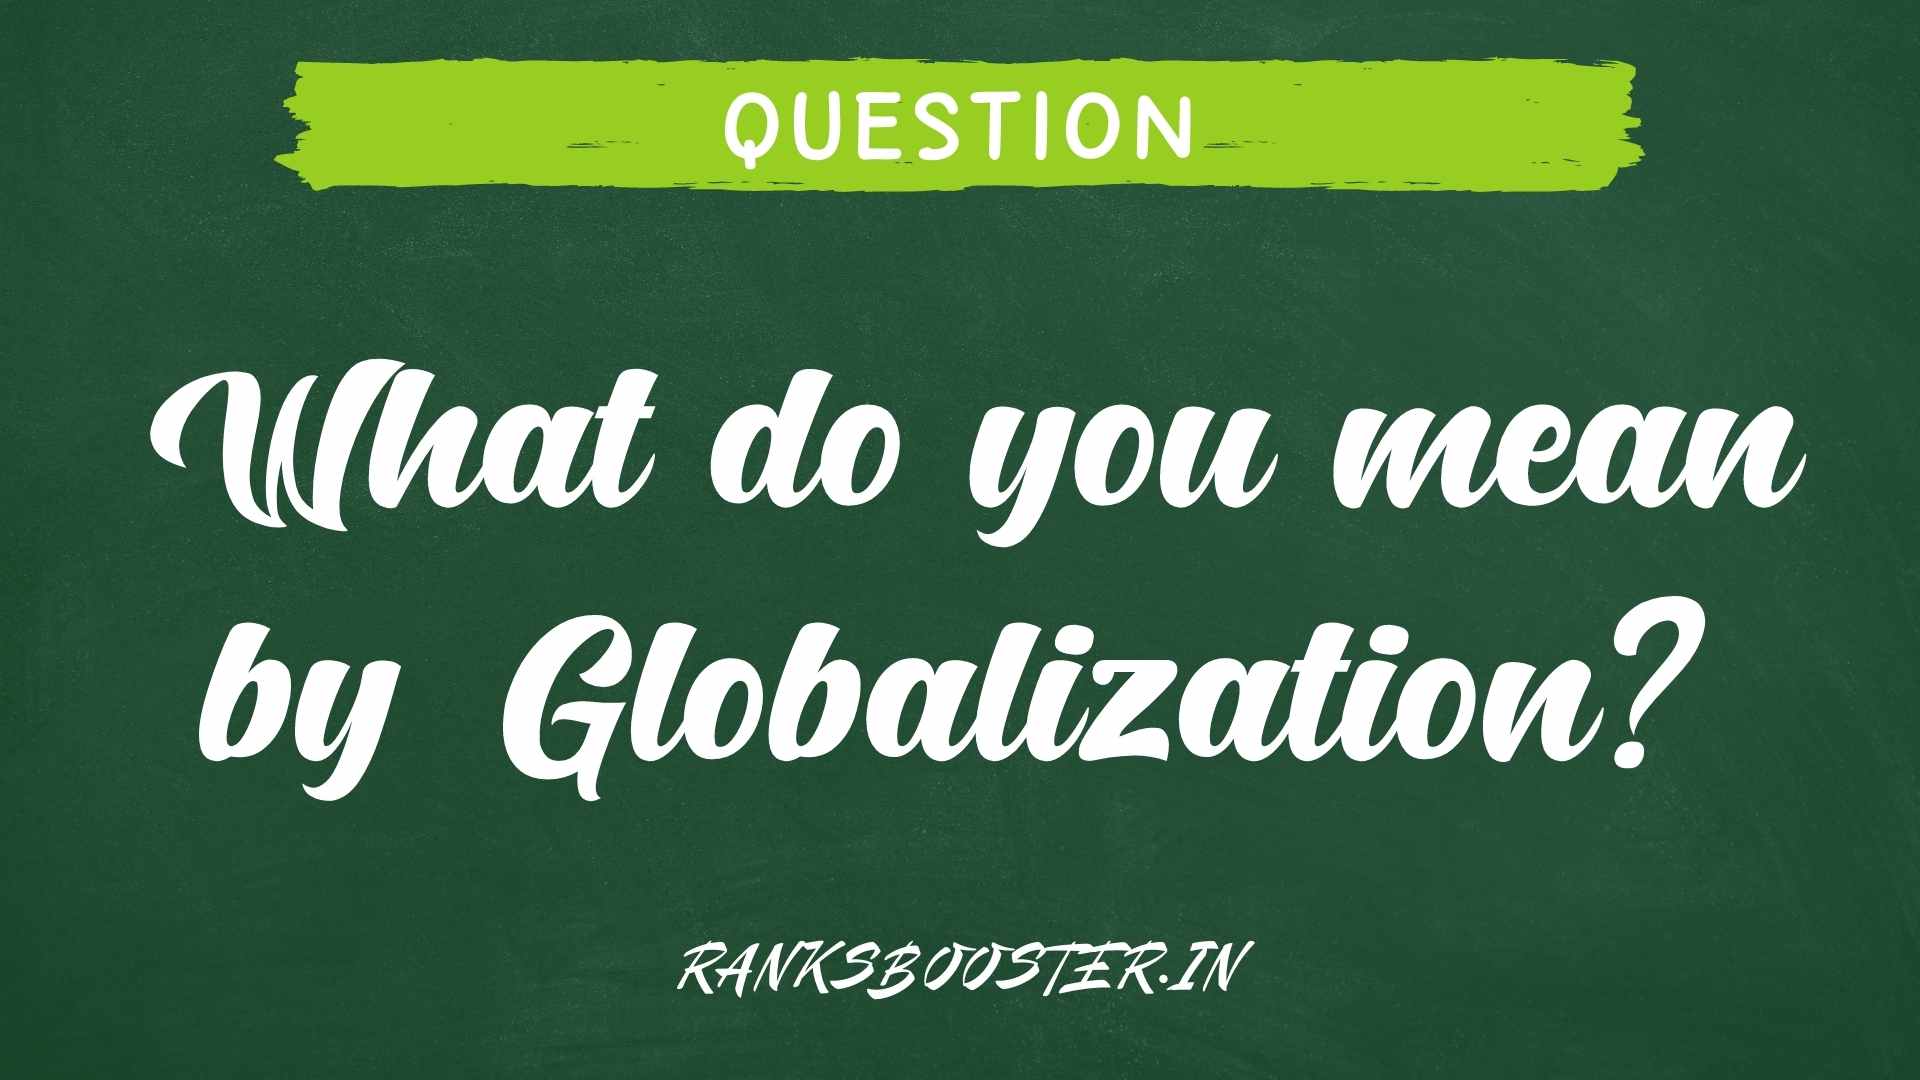 What do you mean by Globalization?